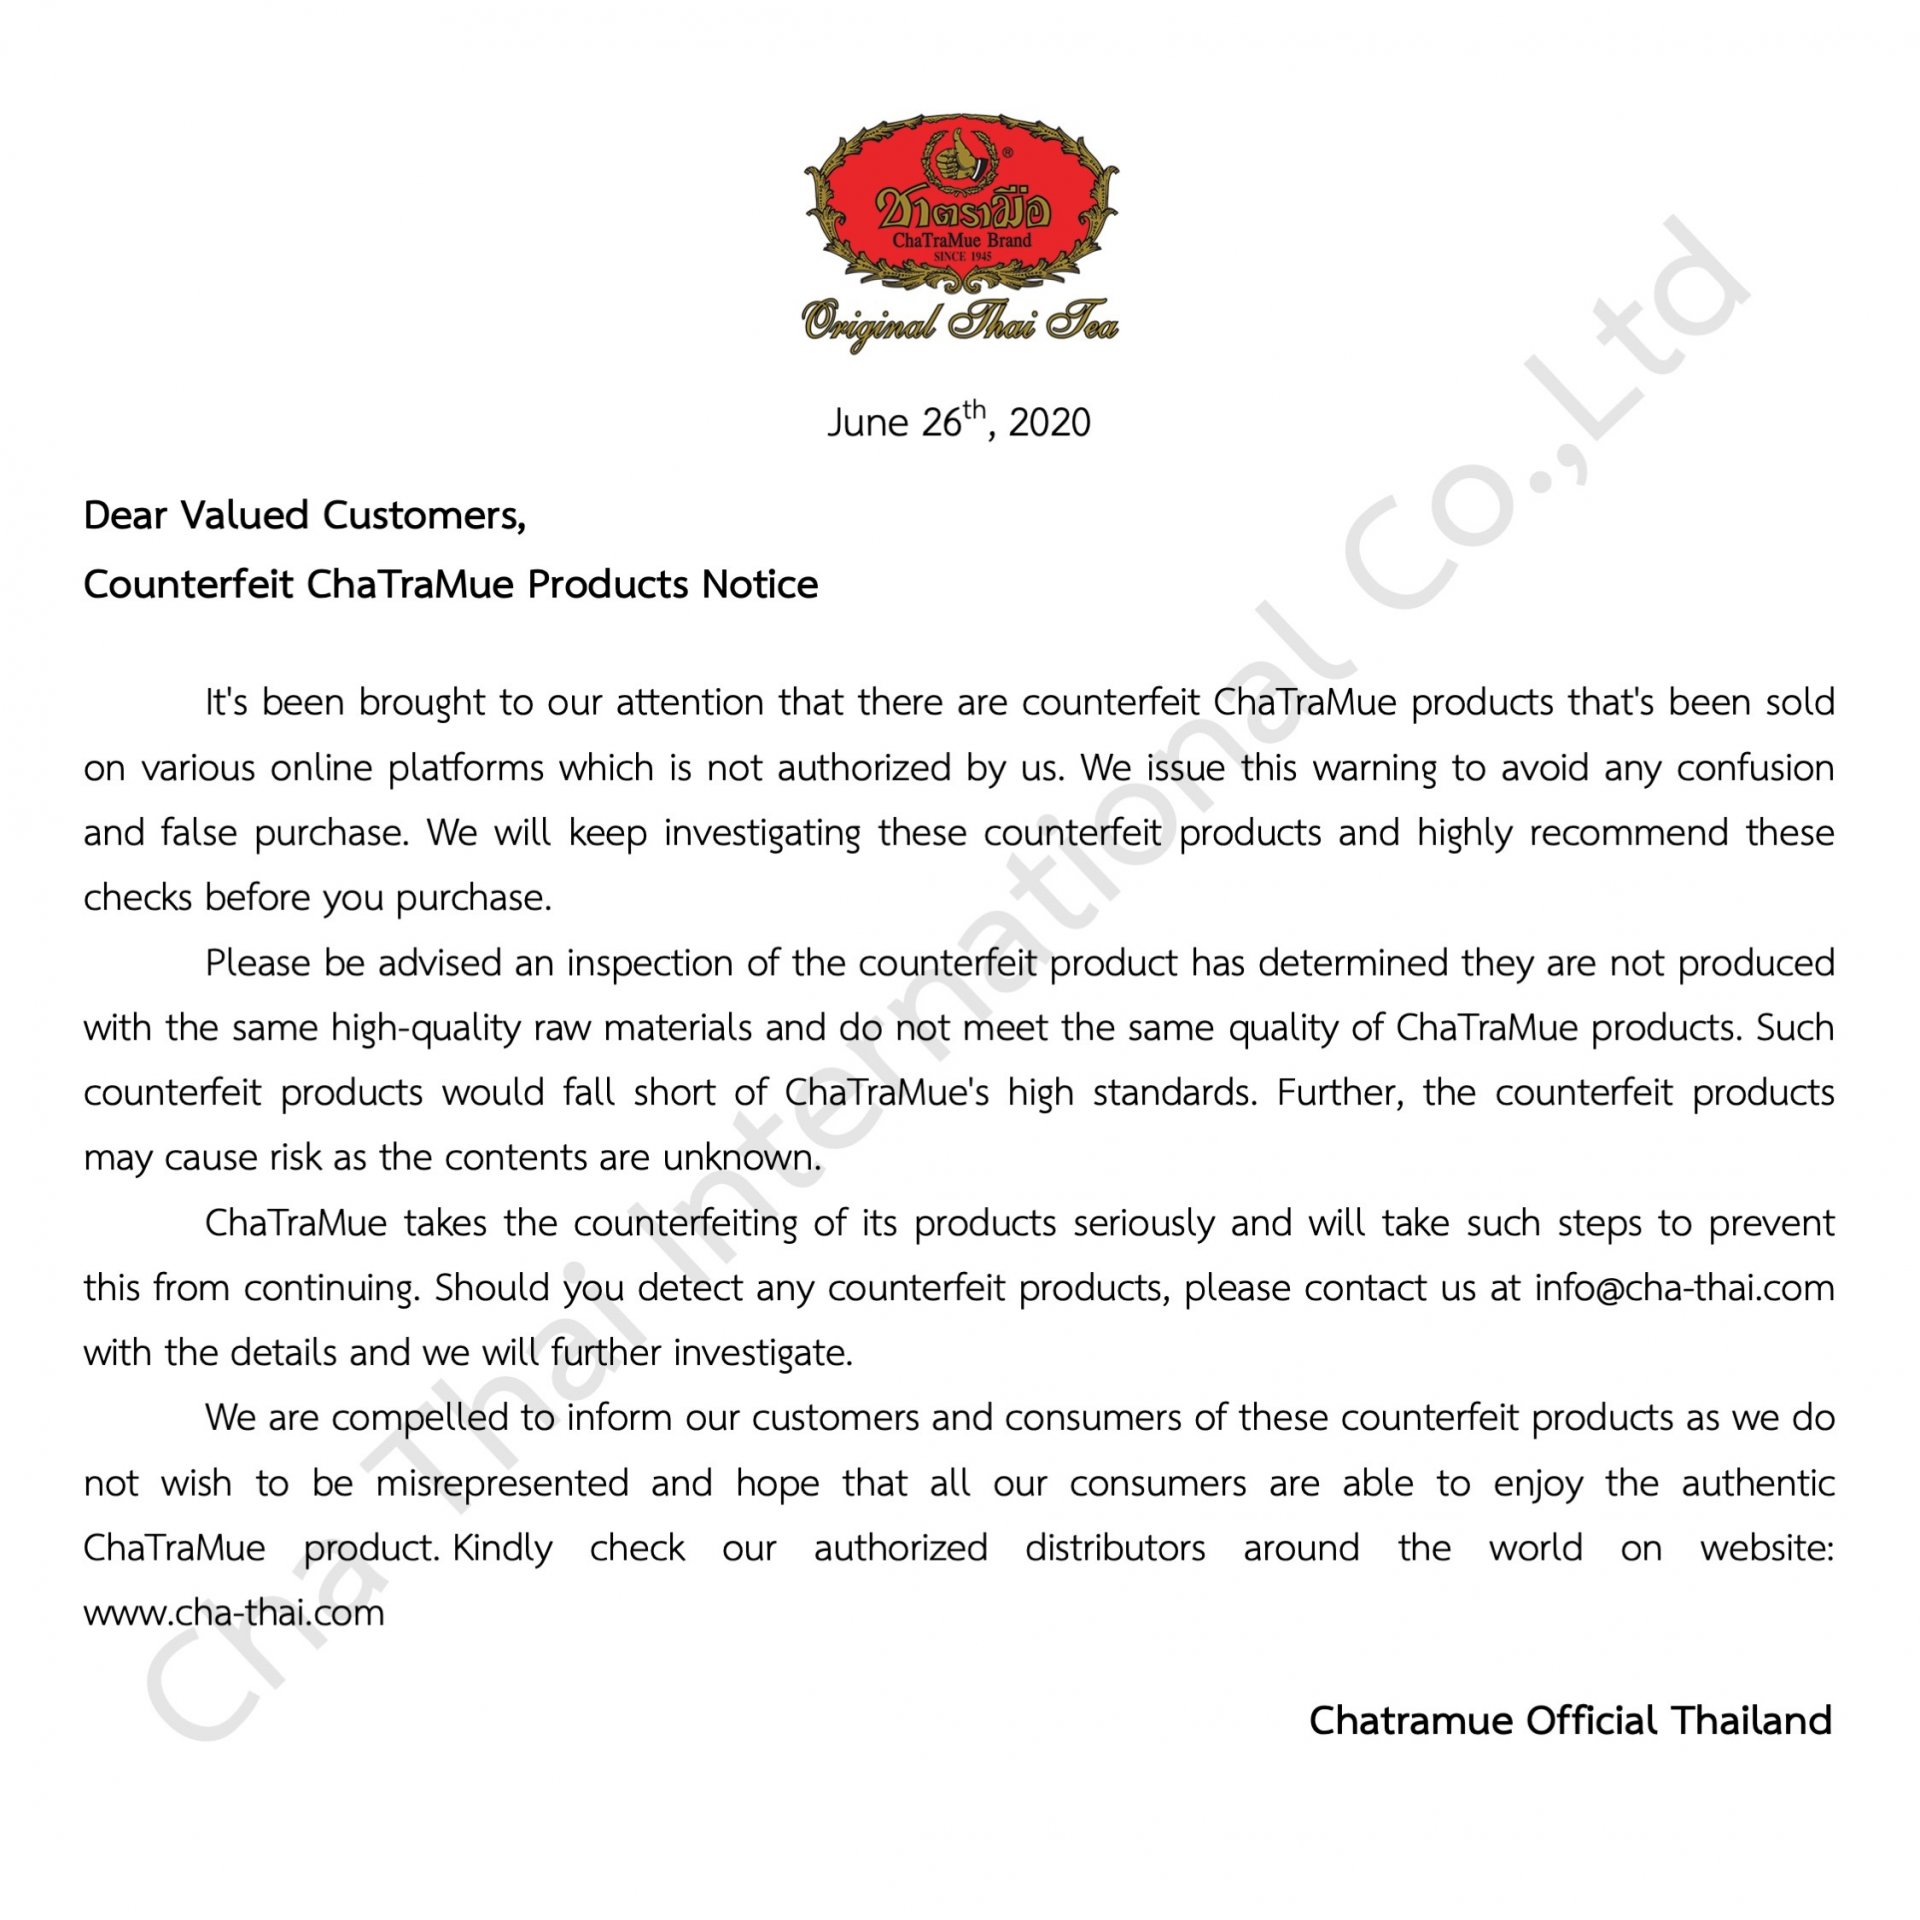 Counterfeit ChaTraMue Products Notice